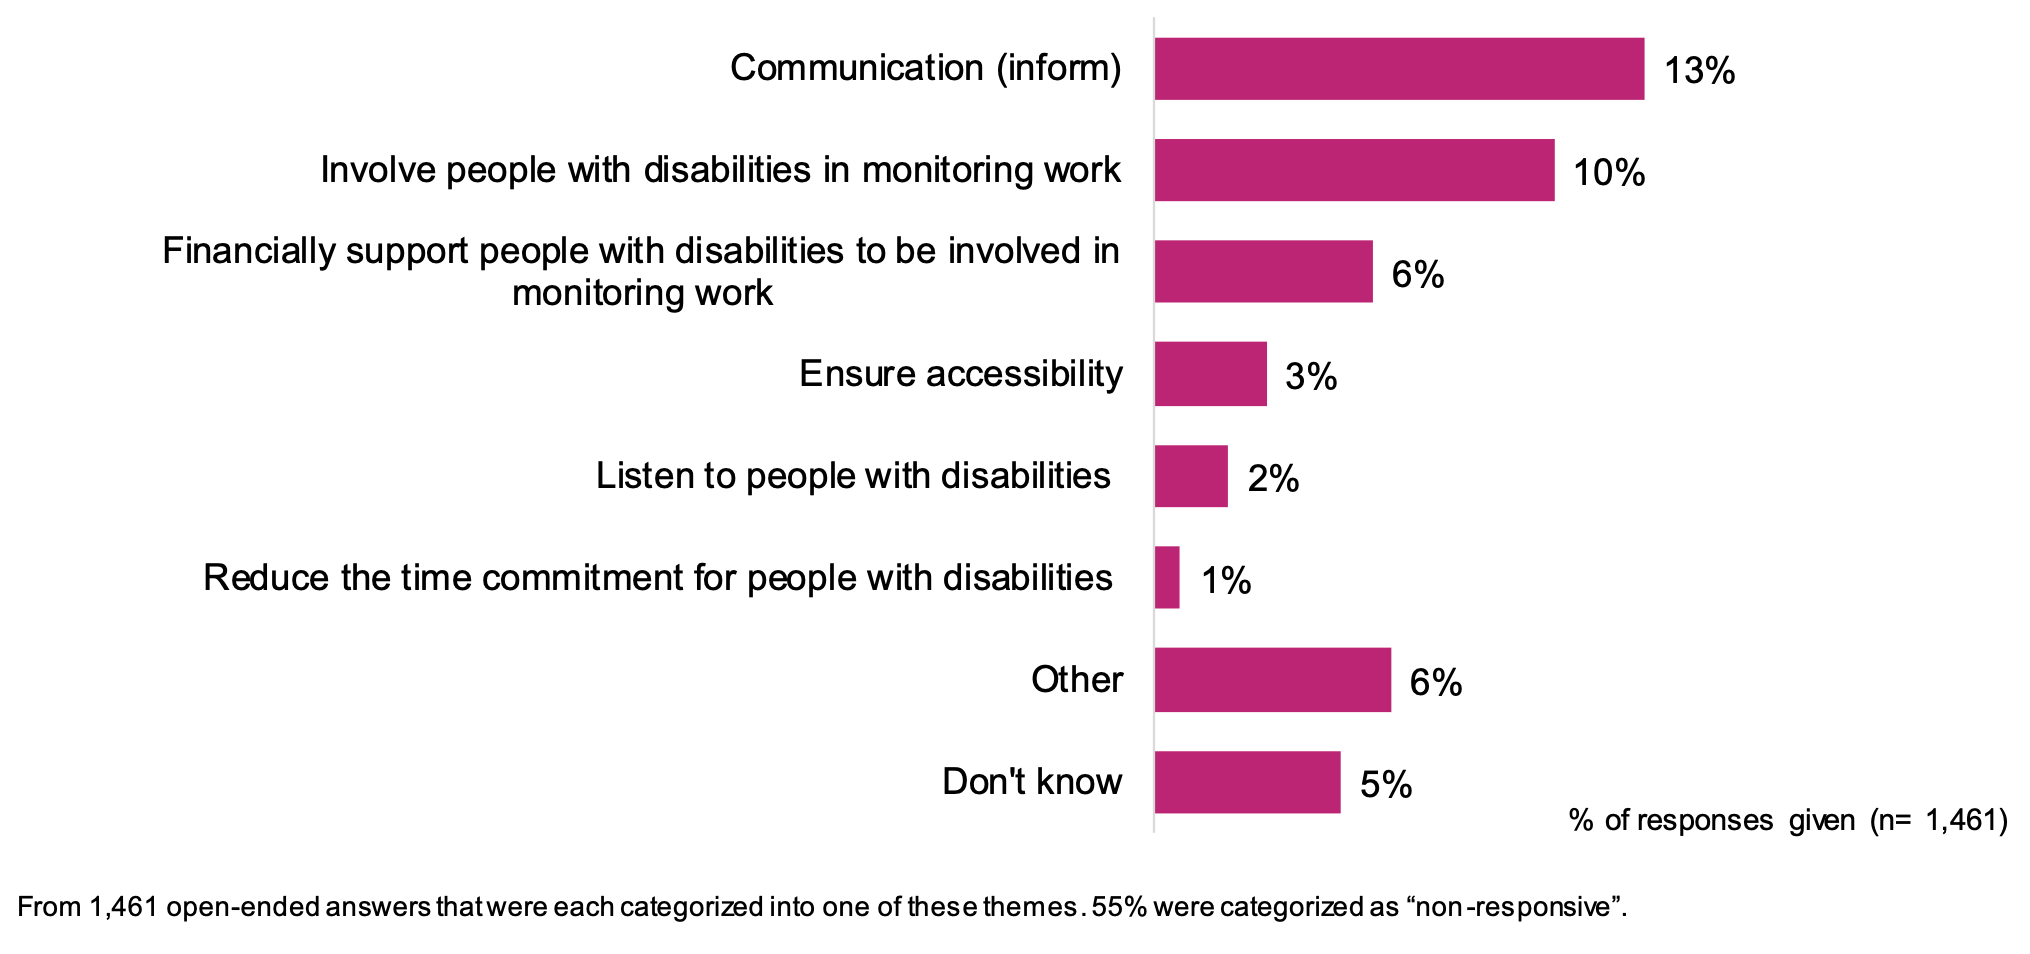 This is a bar chart of examples of things organizations could do to help people participate in monitoring.